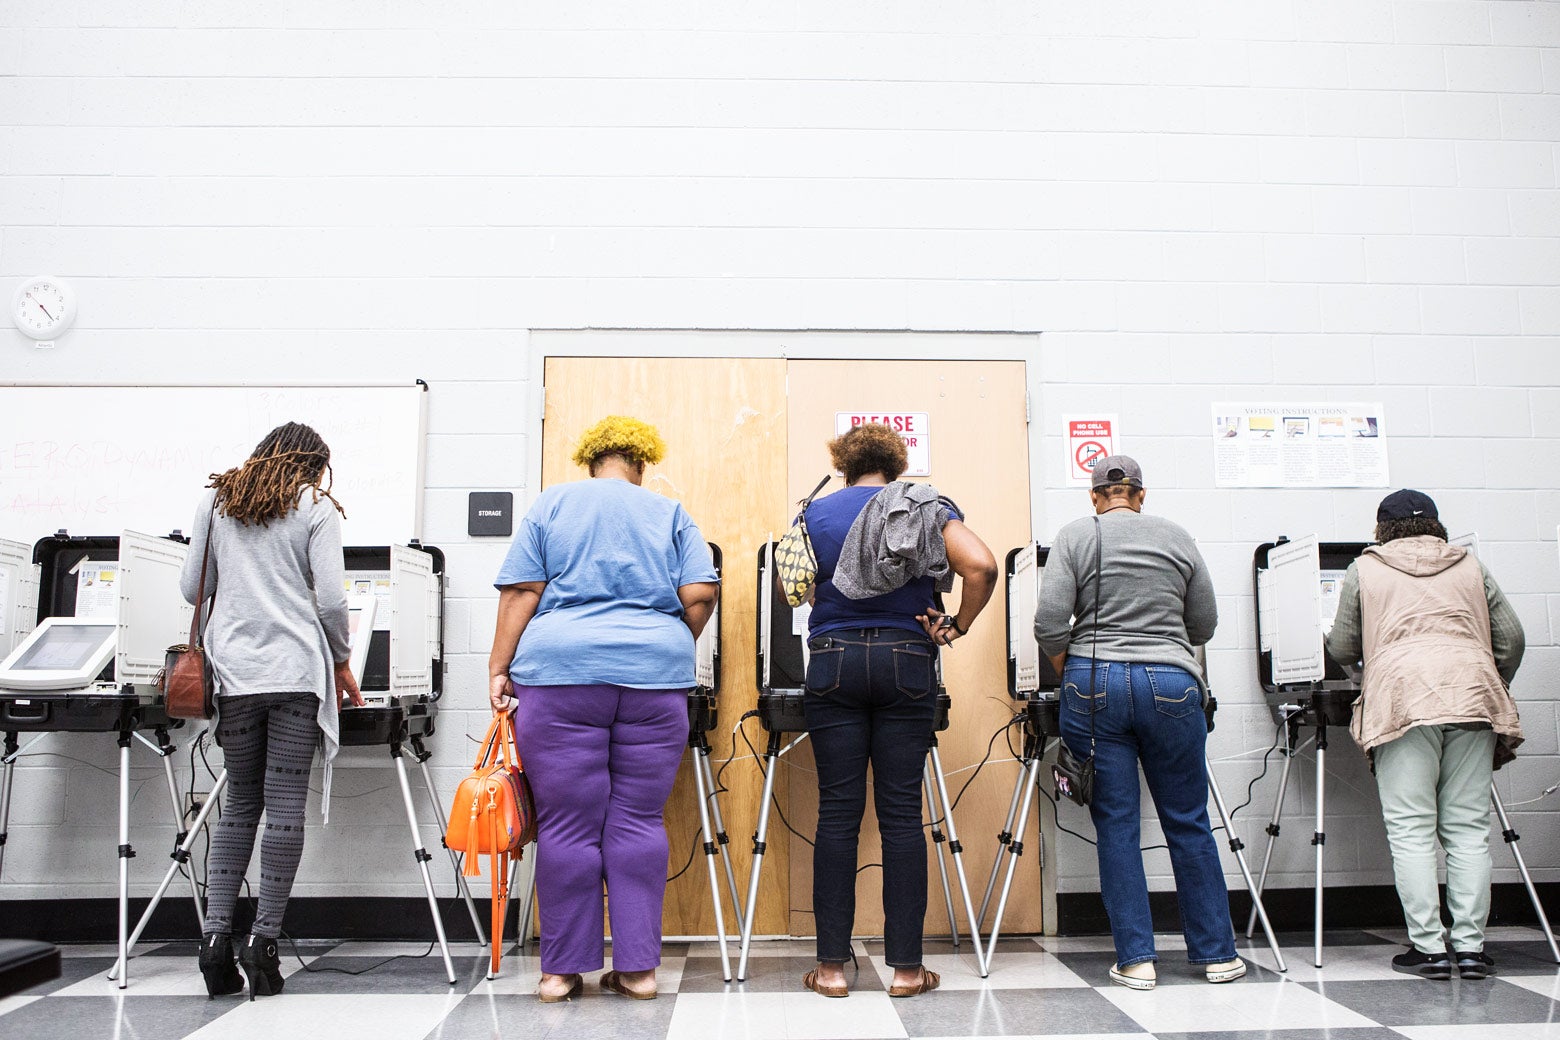 Voters cast ballots during the early voting period at C.T. Martin Natatorium and Recreation Center on October 18, 2018 in Atlanta, Georgia. Early voting started in Georgia on October 15th. 